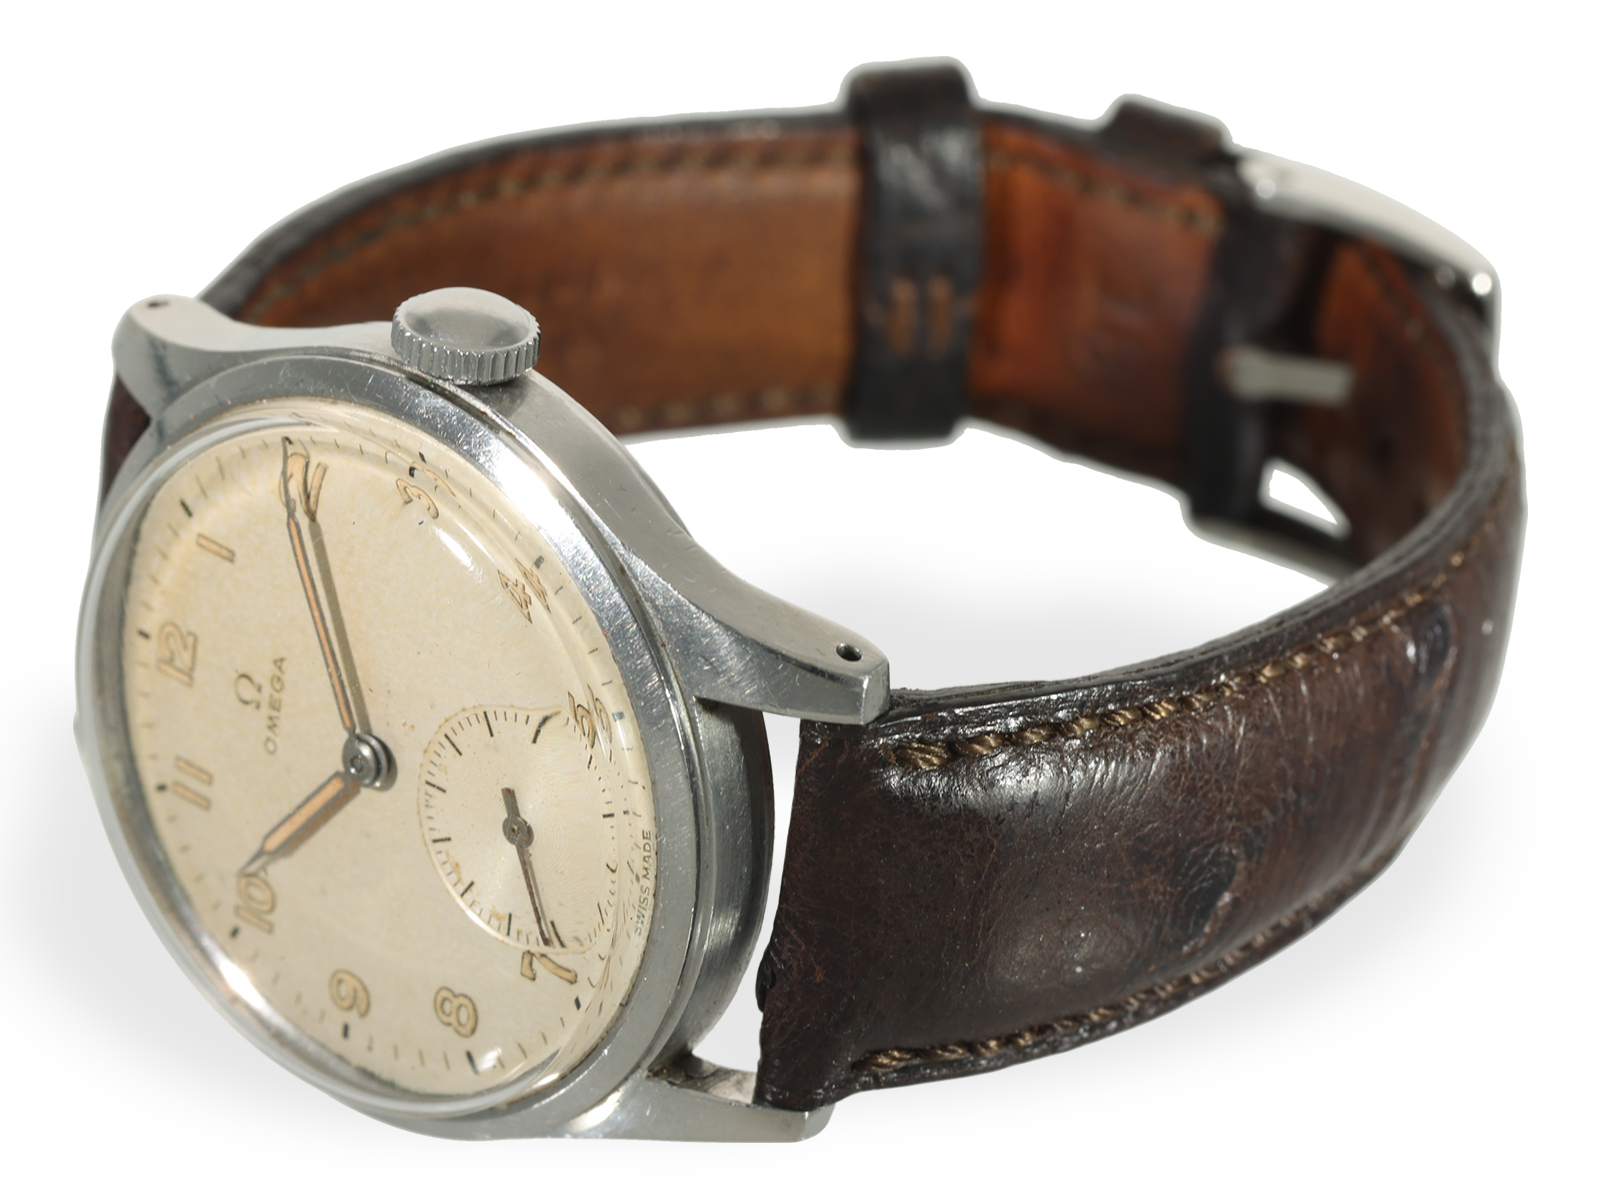 Wristwatch: rare, large Omega "Sei Tacche" Ref. 2383-6 from 1948 - Image 2 of 5